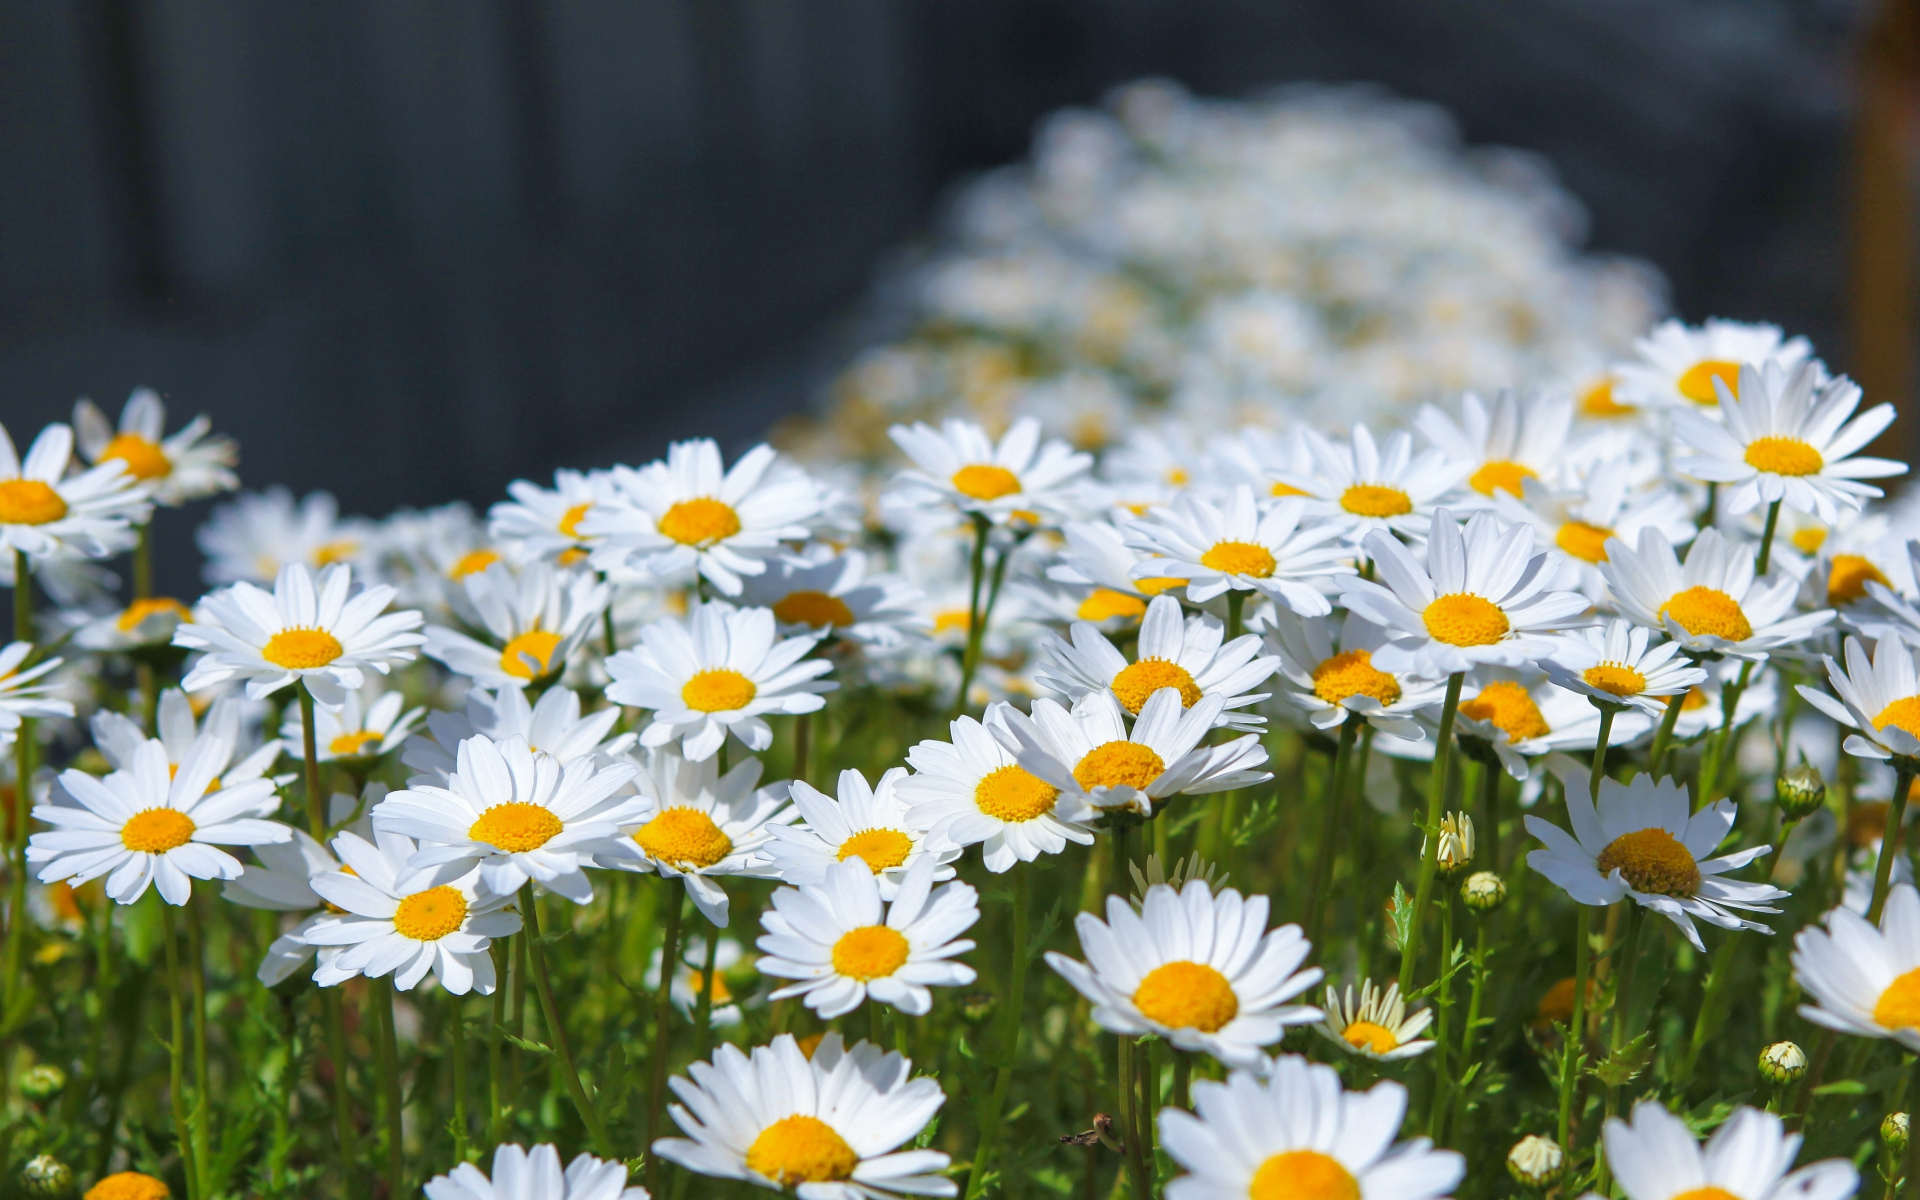 Meadow, spring, flowers, white daisy, 1920x1200 wallpaper